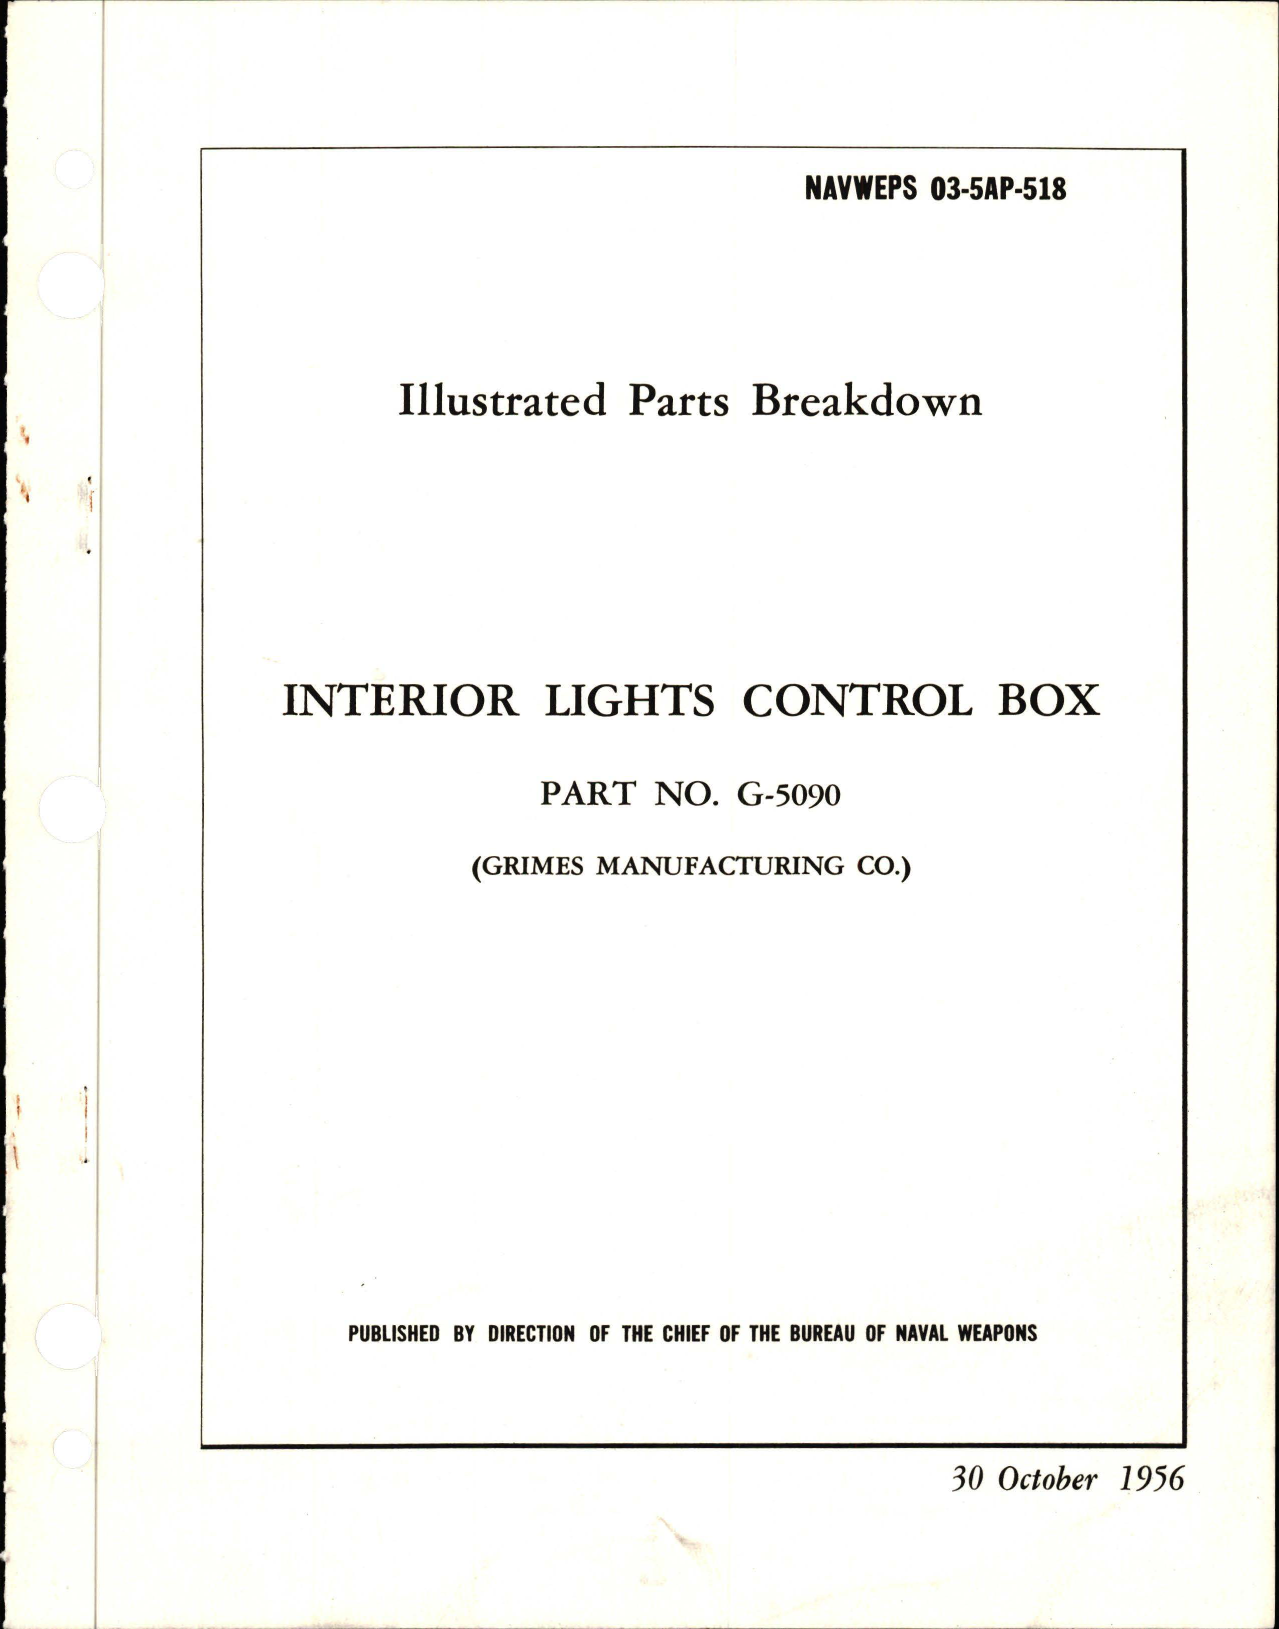 Sample page 1 from AirCorps Library document: Illustrated Parts Breakdown for Interior Light Control Box - Part G-5090